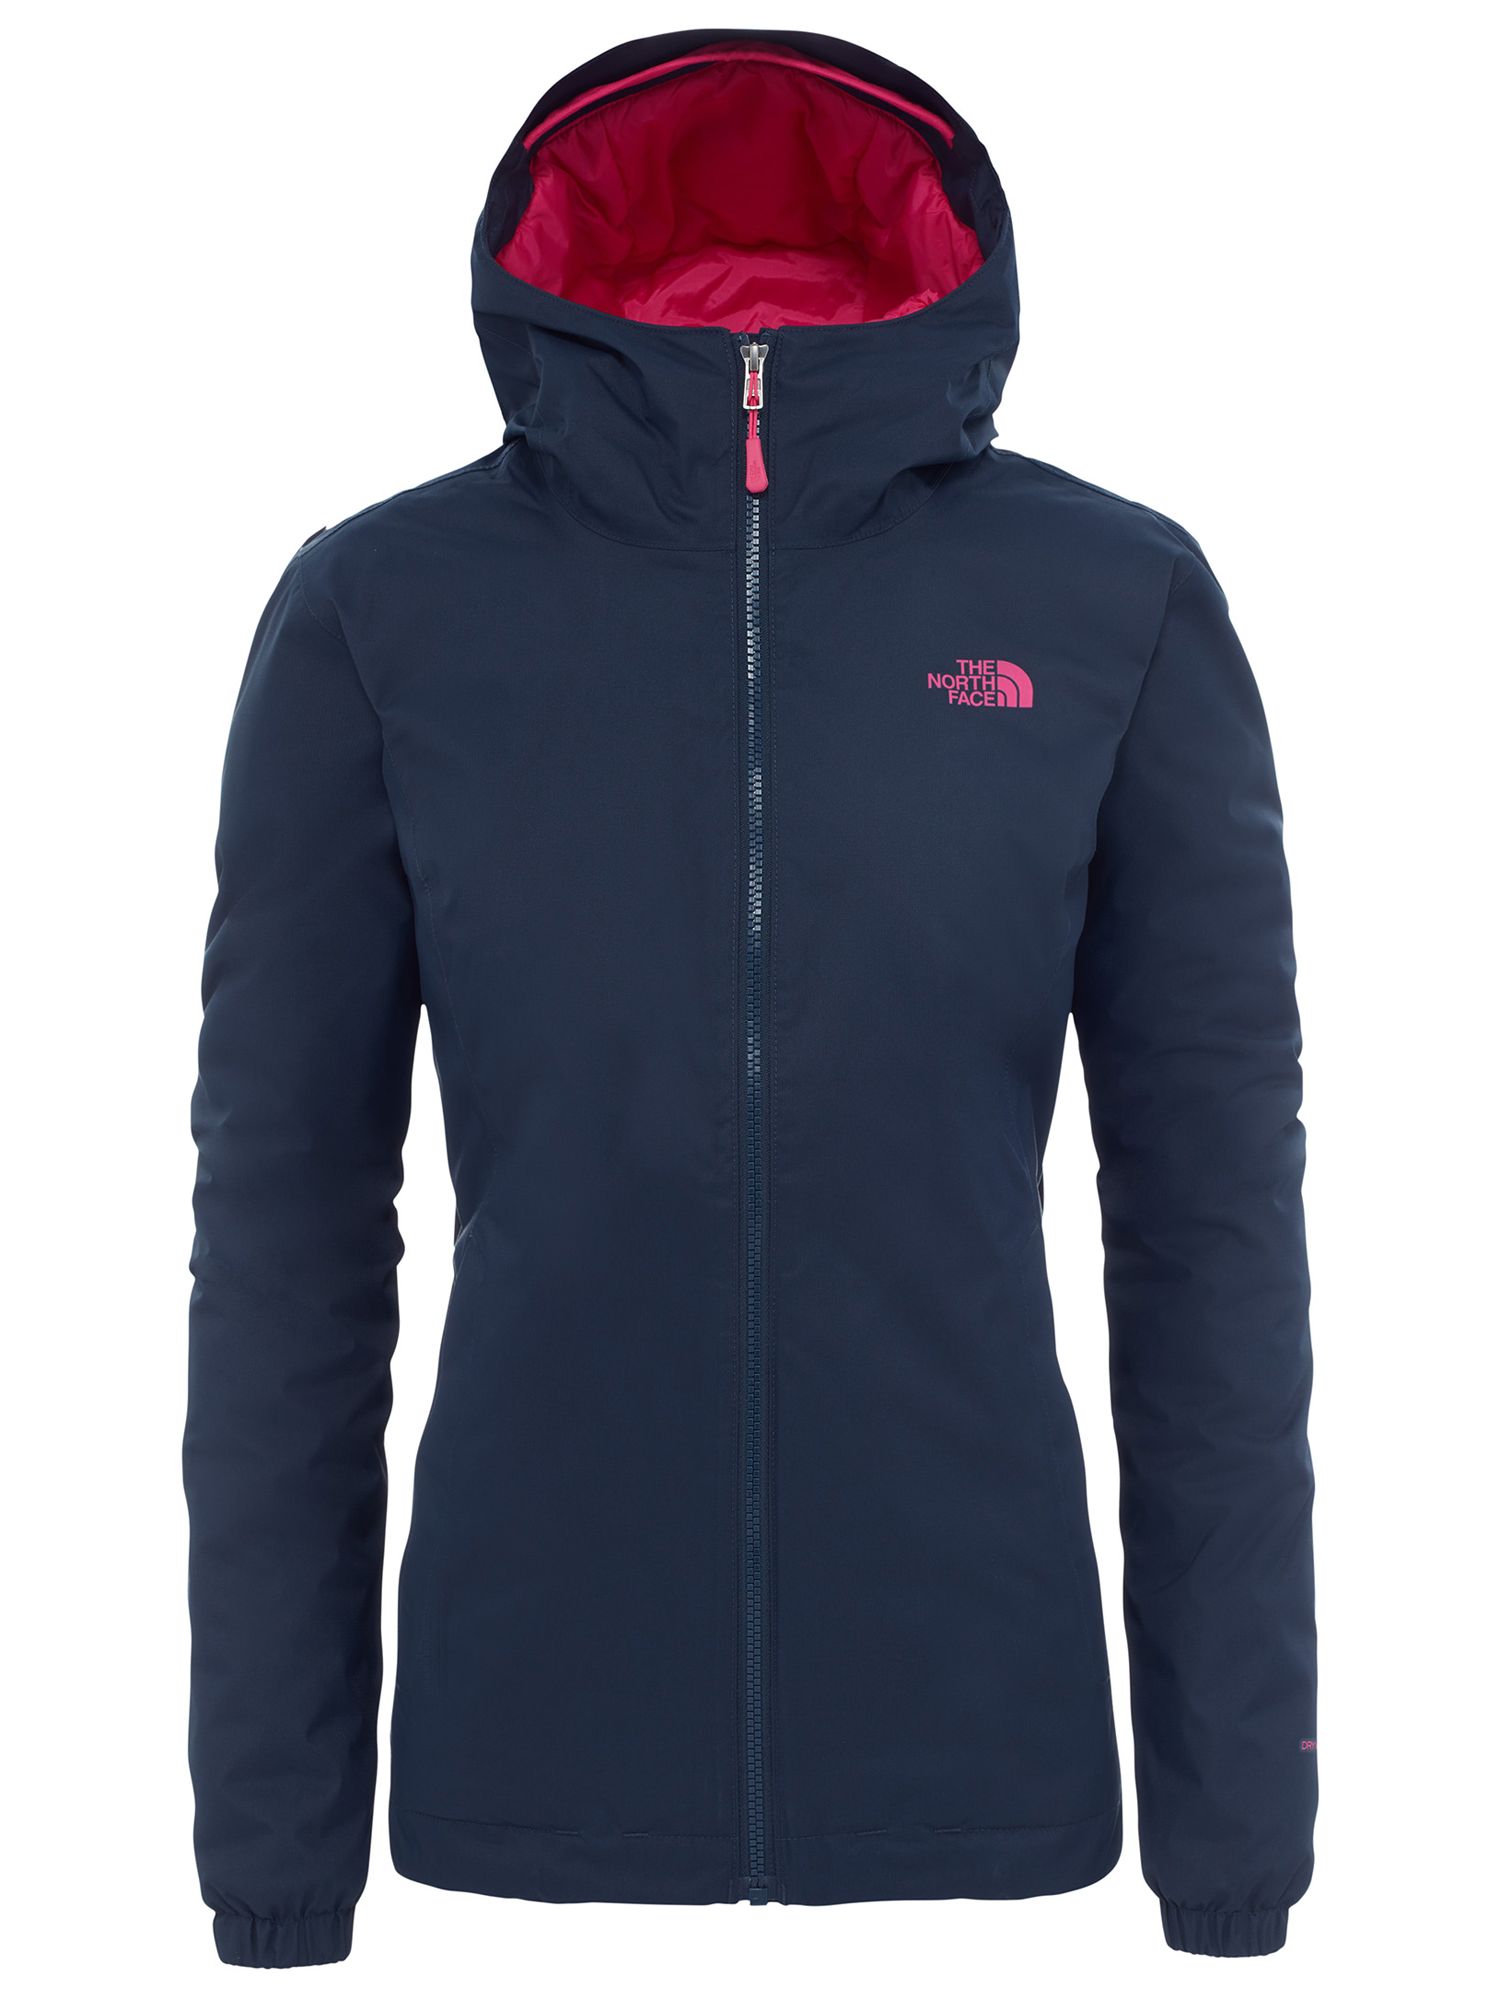 The North Face Quest Women's Waterproof Insulated Jacket